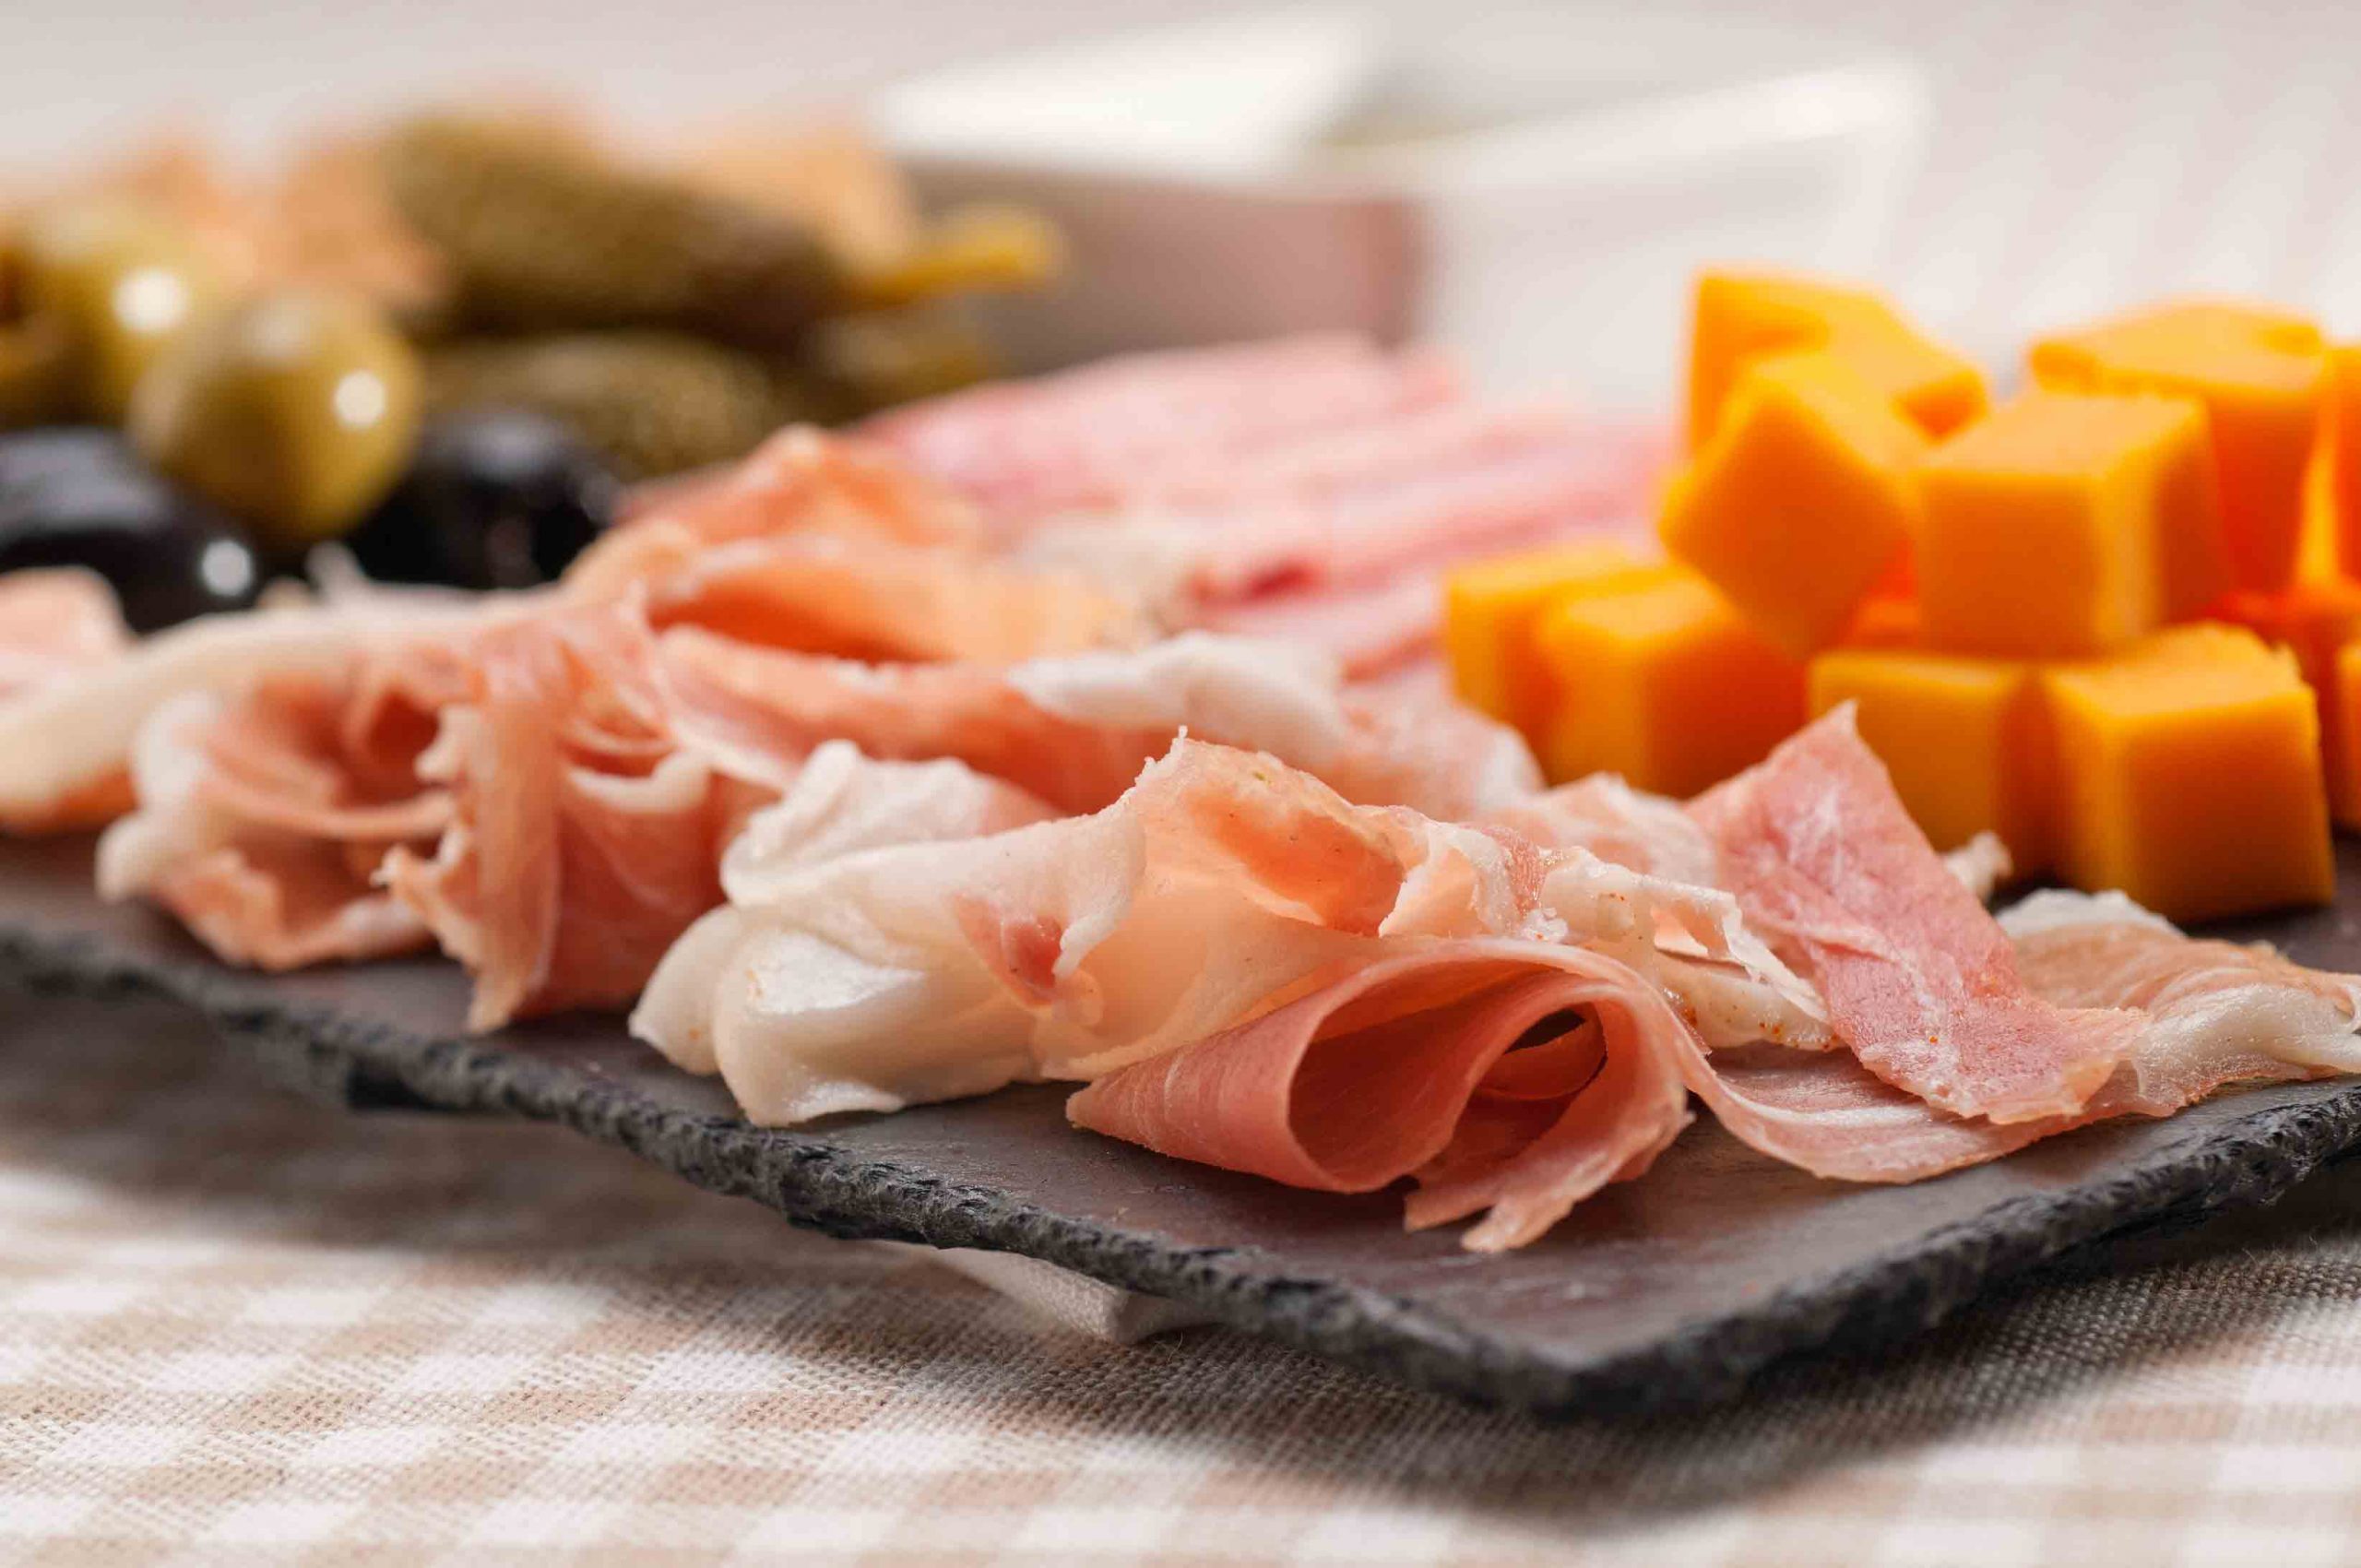 A platter with ham, cheese, olives and pickles.